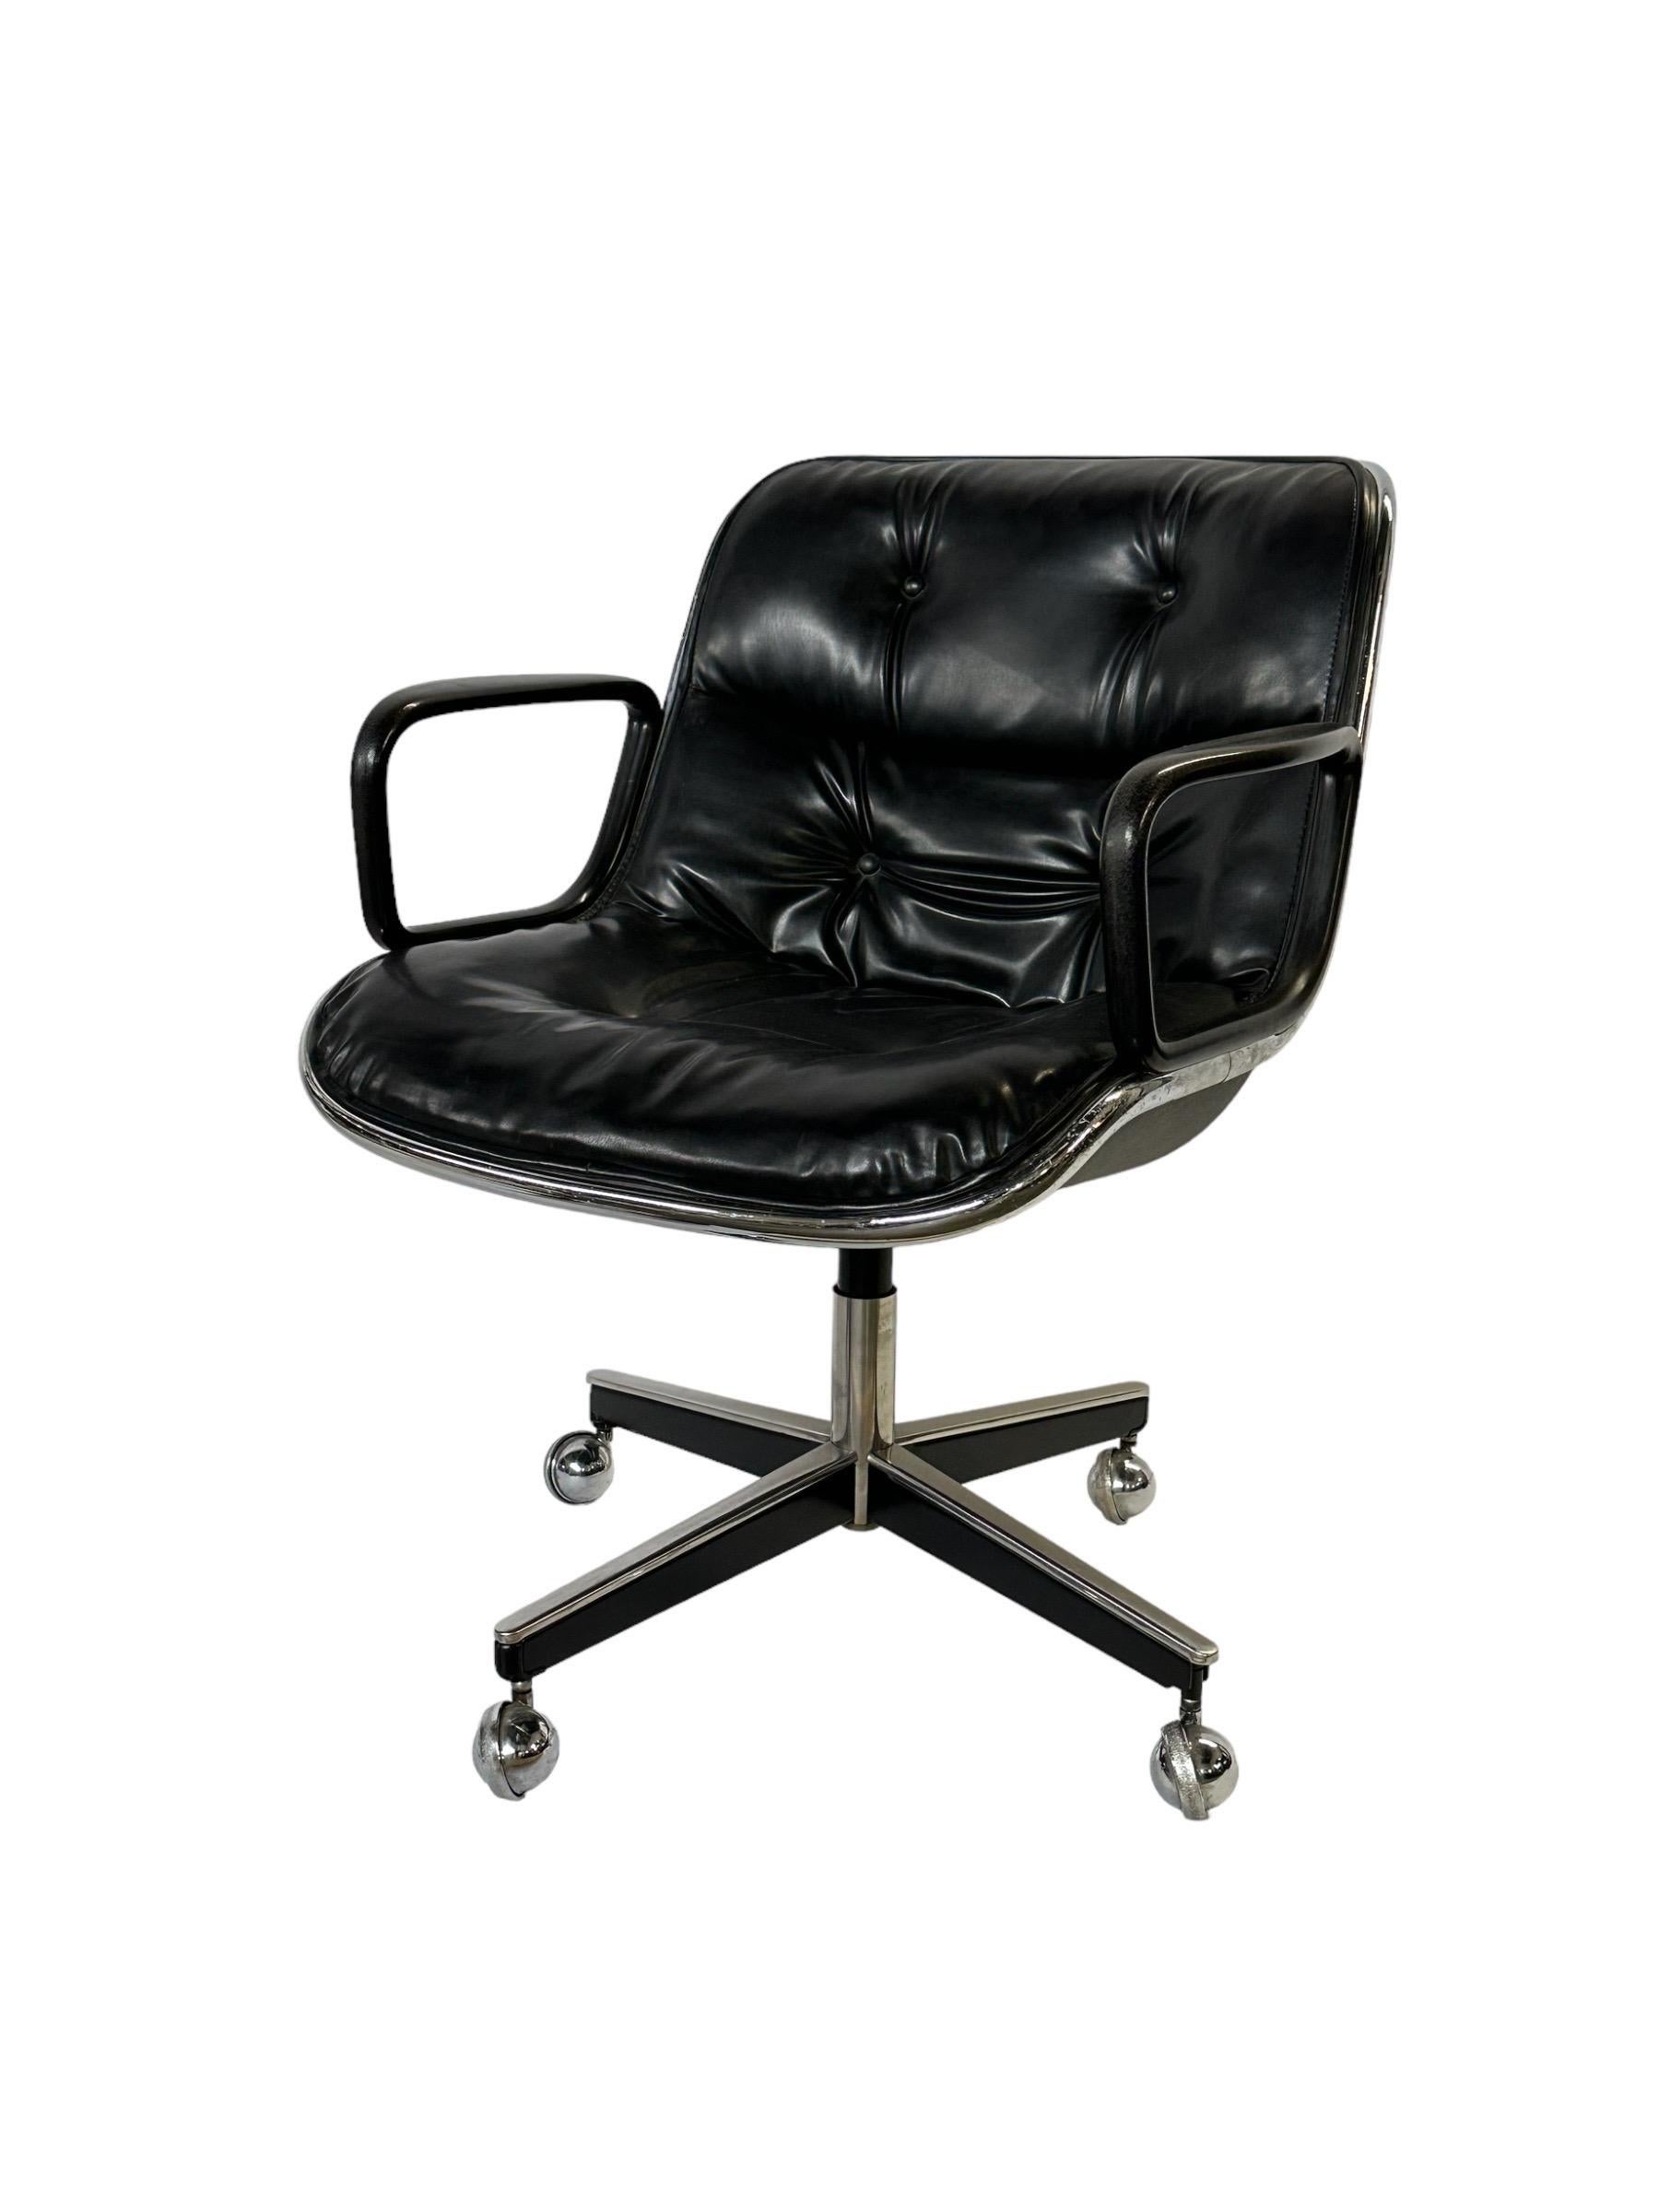 American Charles Pollock Desk Chair for Knoll